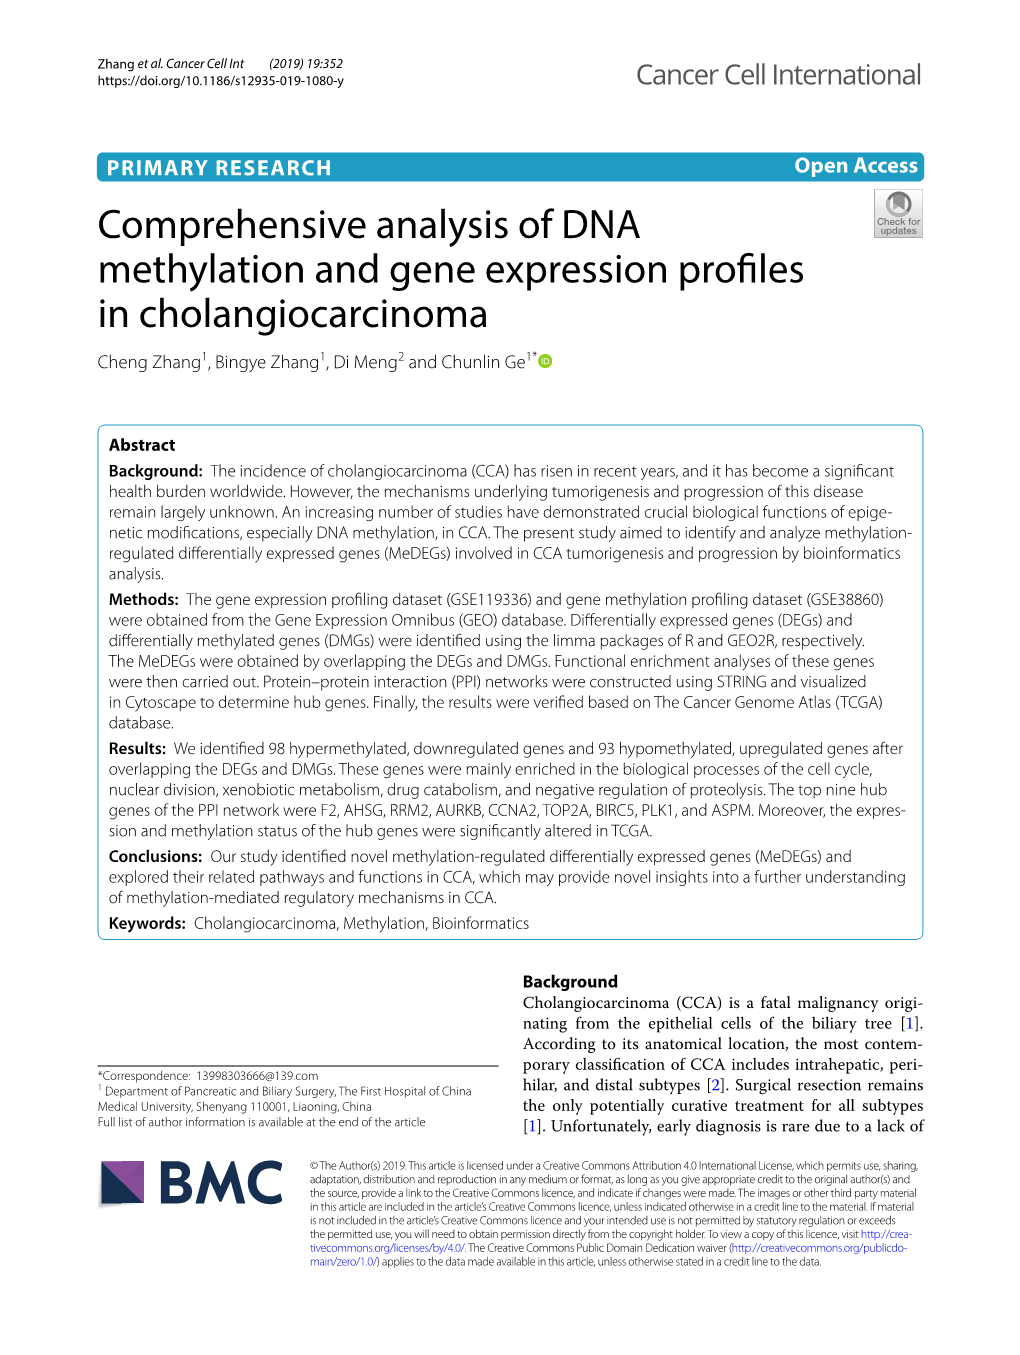 Comprehensive Analysis of DNA Methylation and Gene Expression Profles in Cholangiocarcinoma Cheng Zhang1, Bingye Zhang1, Di Meng2 and Chunlin Ge1*